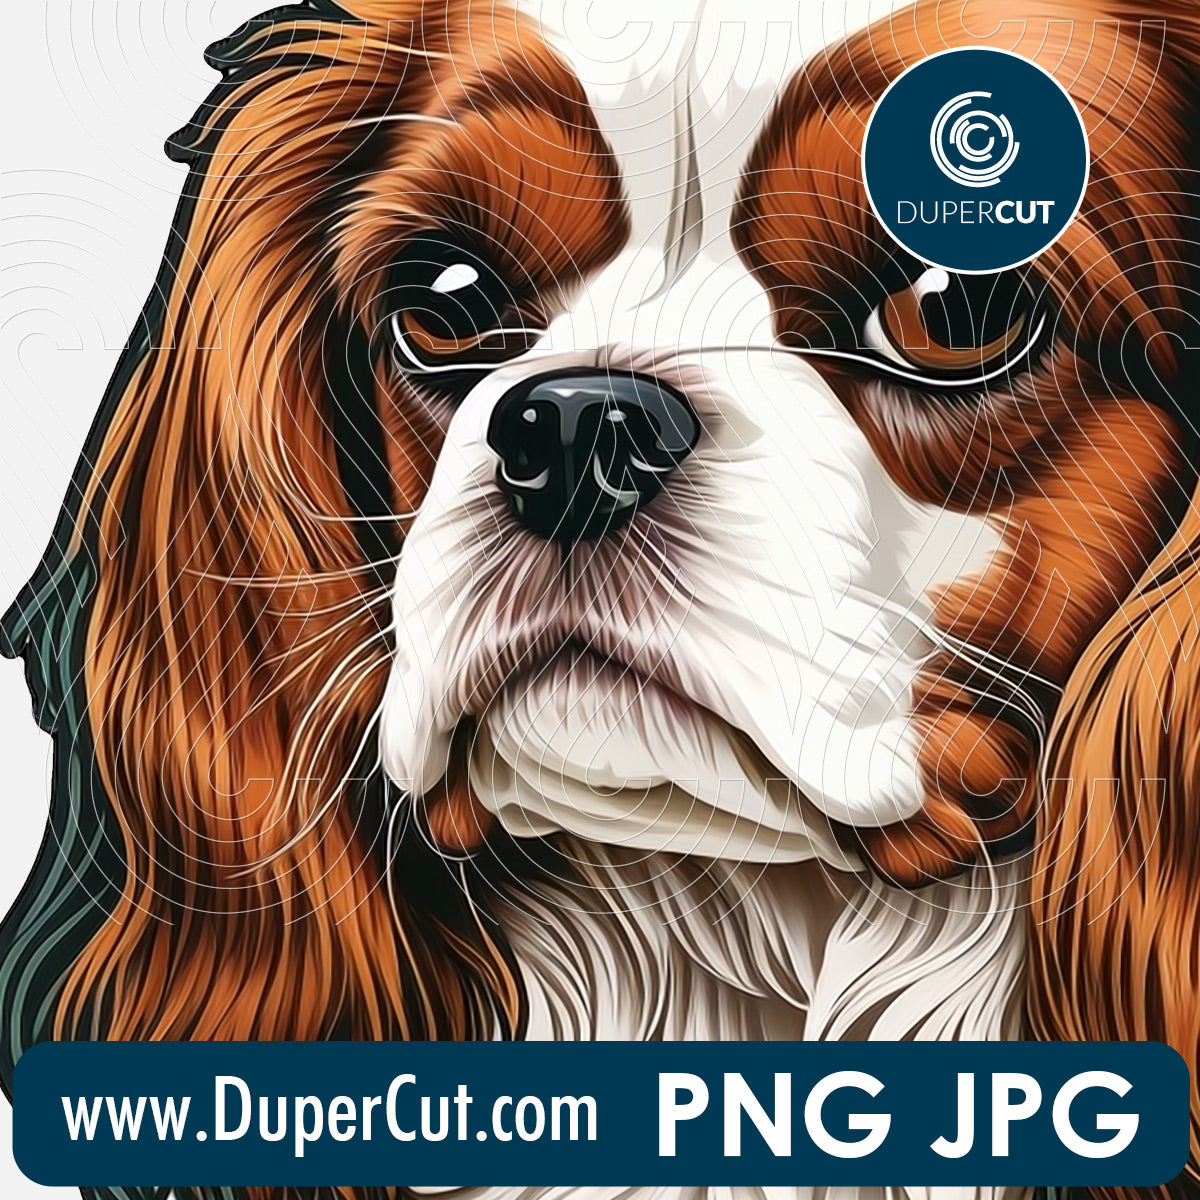 Cavalier king charles spaniel dog breed - JPG PNG file transparent background, high res pattern for sublimation, print on demand by www.dupercut.com